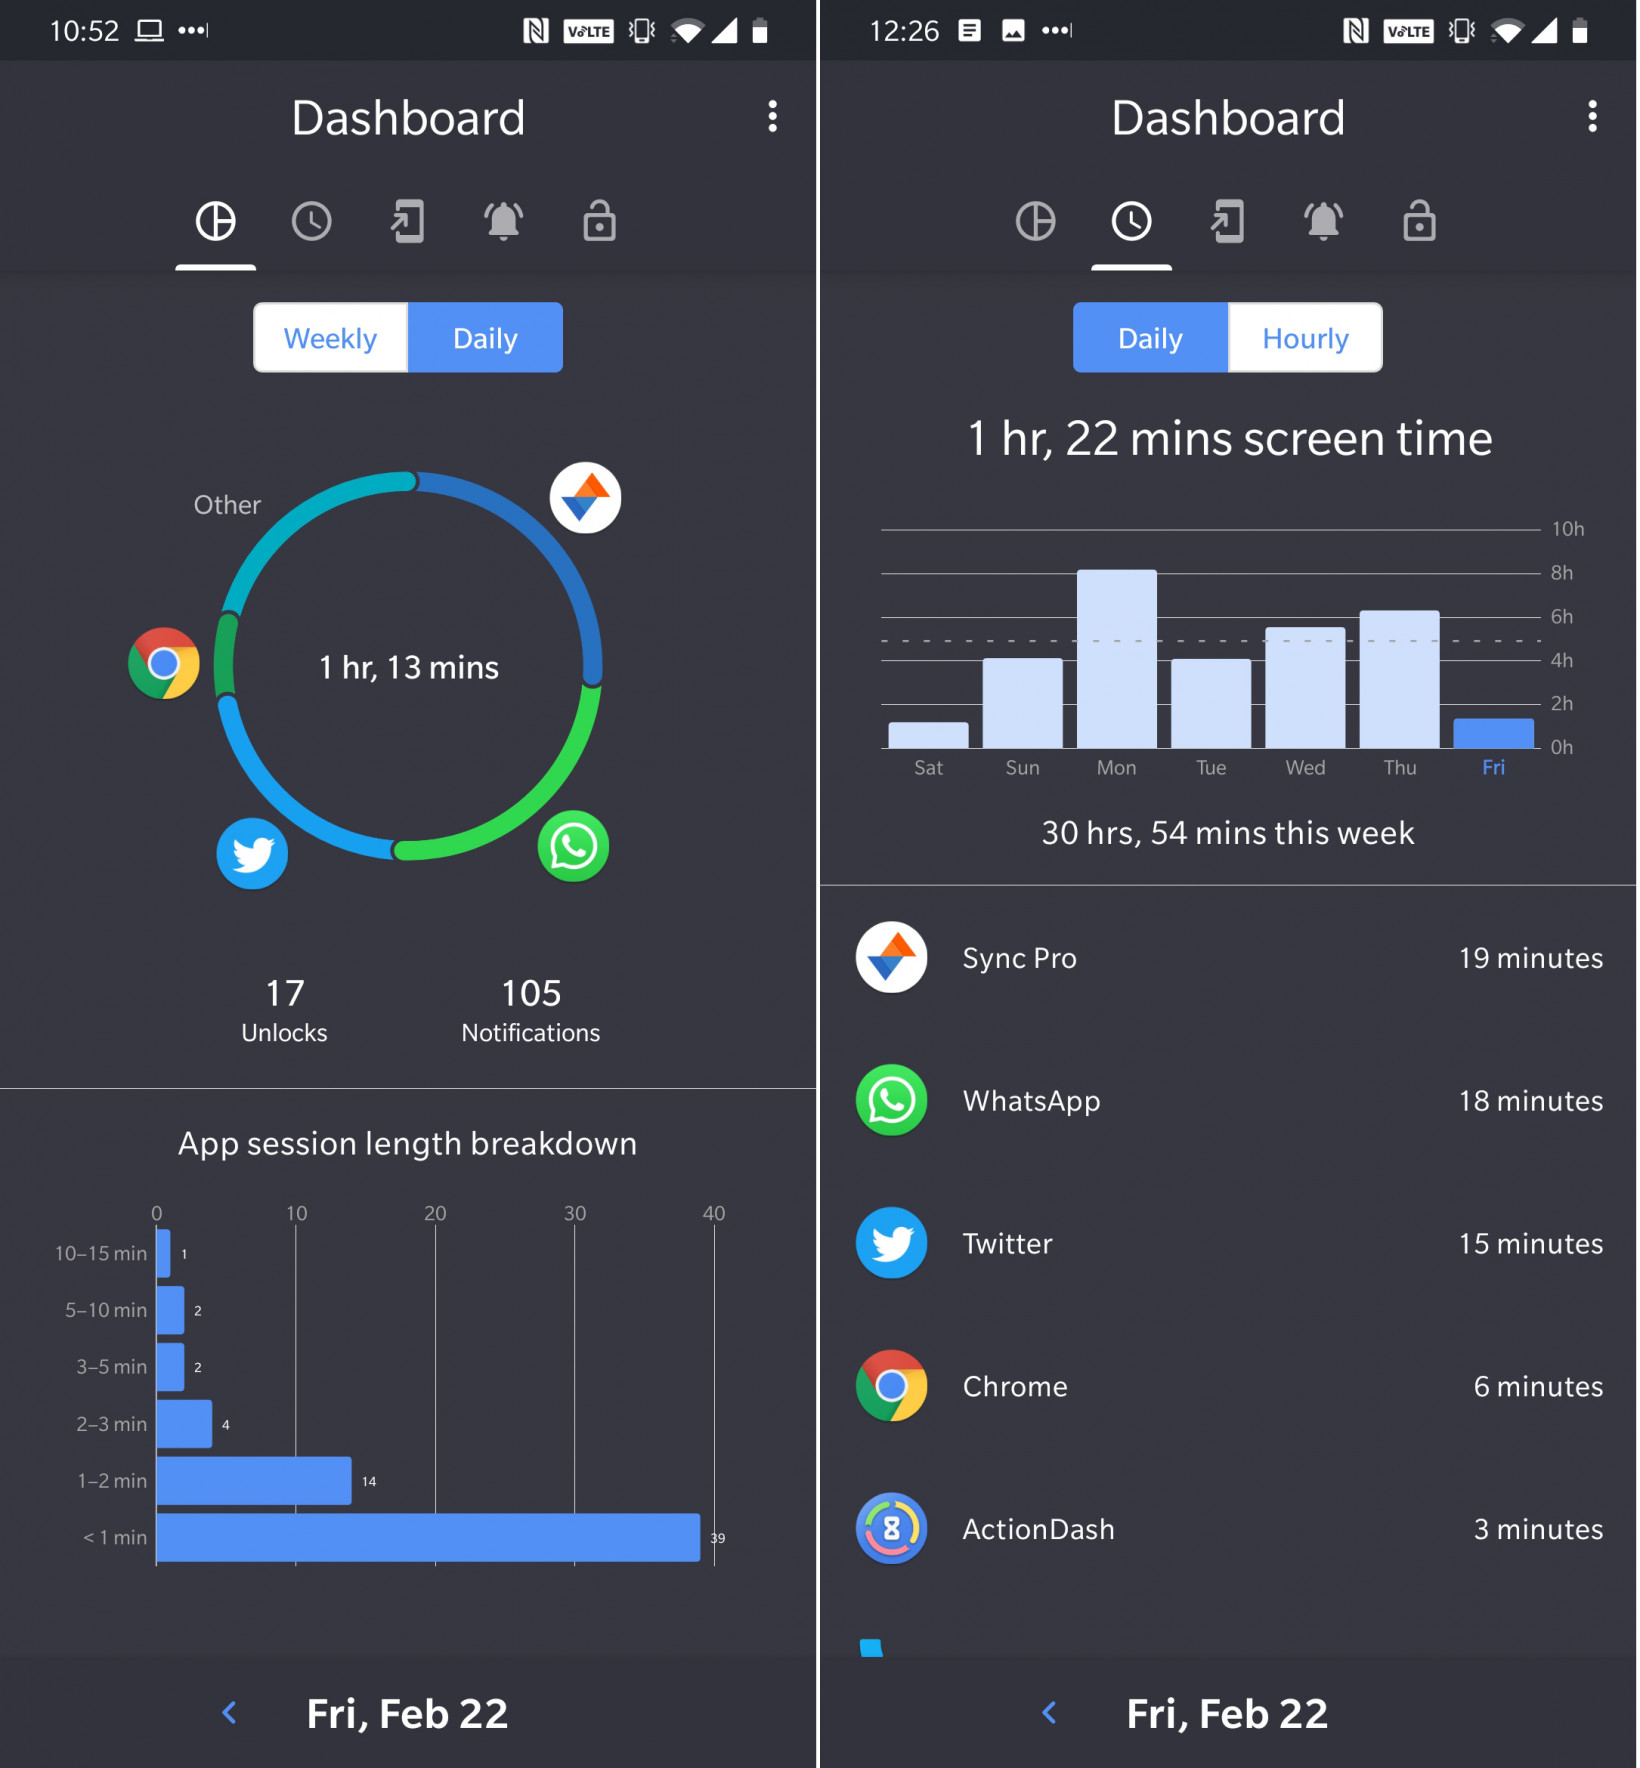 ActionDash helps you visualize the time you spend on different apps on your phone